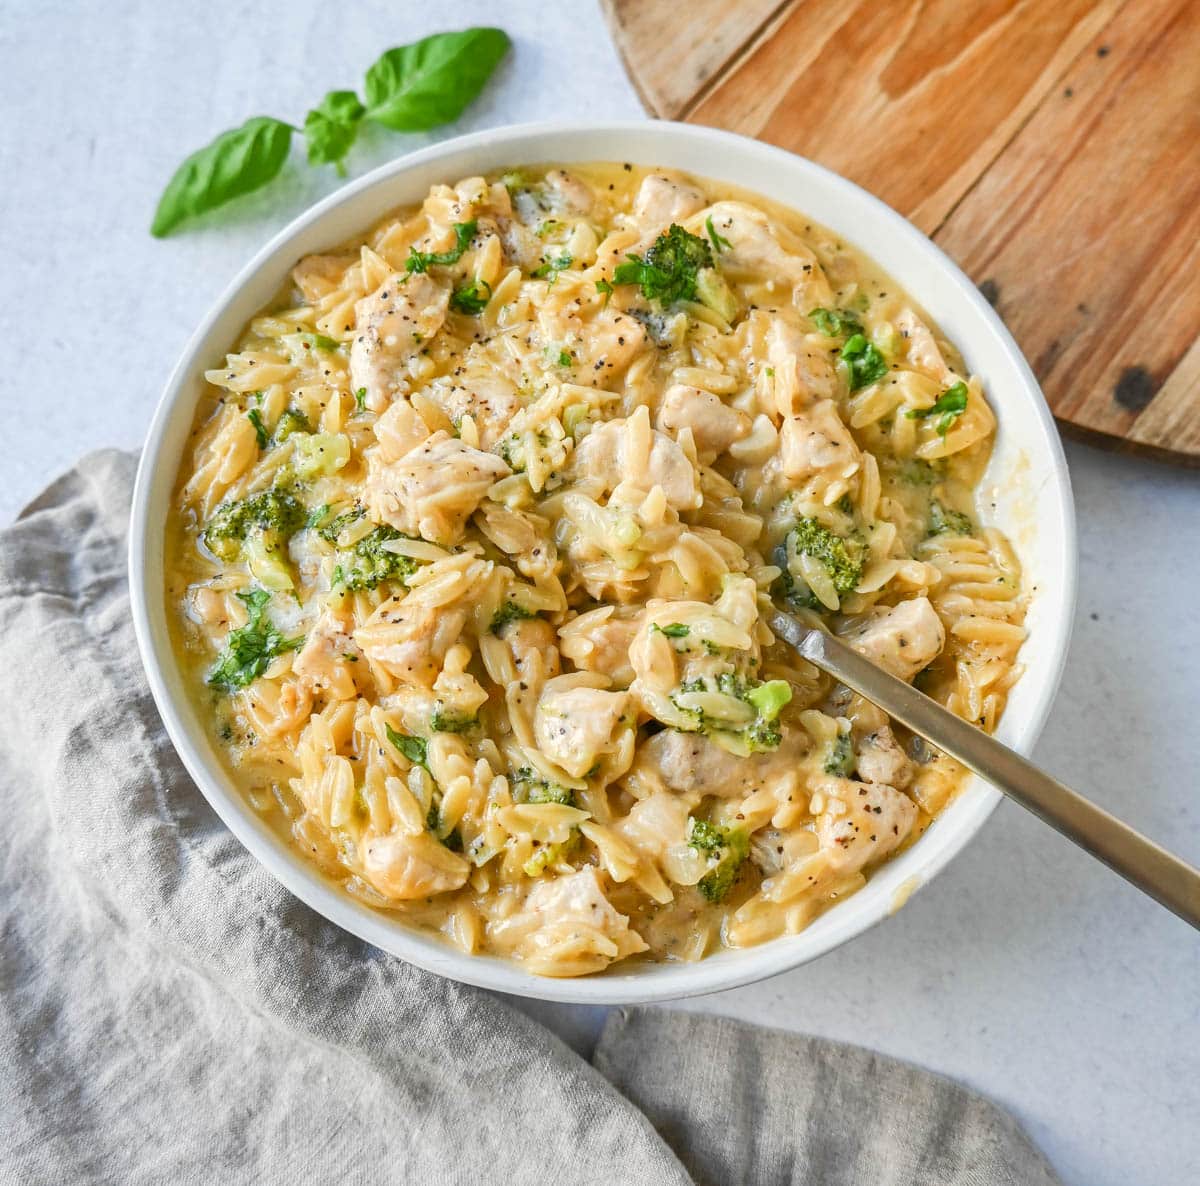 Creamy Chicken Broccoli Orzo made with sauteed chicken, fresh broccoli, orzo pasta in a cheesy sauce. This easy Cheesy Chicken Broccoli Orzo Skillet 30-minute meal is creamy and delicious!